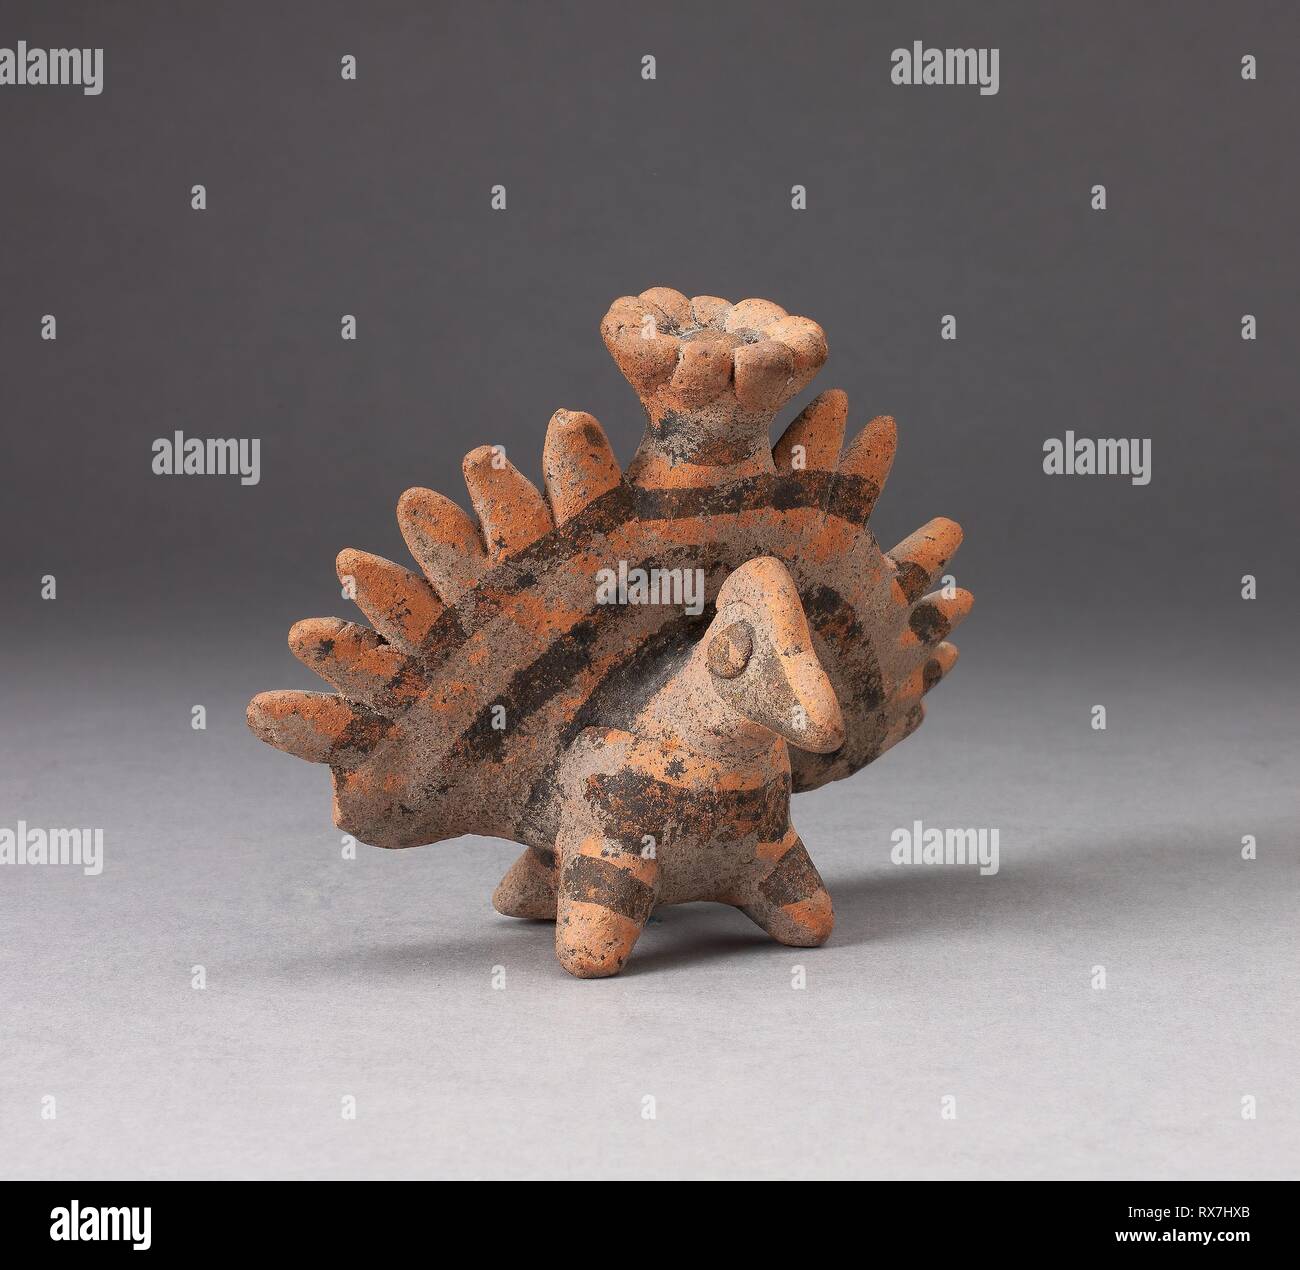 Miniature Figure in the Form of a Bird with Exaggerated Tailfeathers. Colima; Colima, Mexico. Date: 100 AD-300 AD. Dimensions: 8.6 × 11.4 cm (3 3/8 × 4 1/2 in.). Ceramic and pigment. Origin: Colima state. Museum: The Chicago Art Institute. Stock Photo